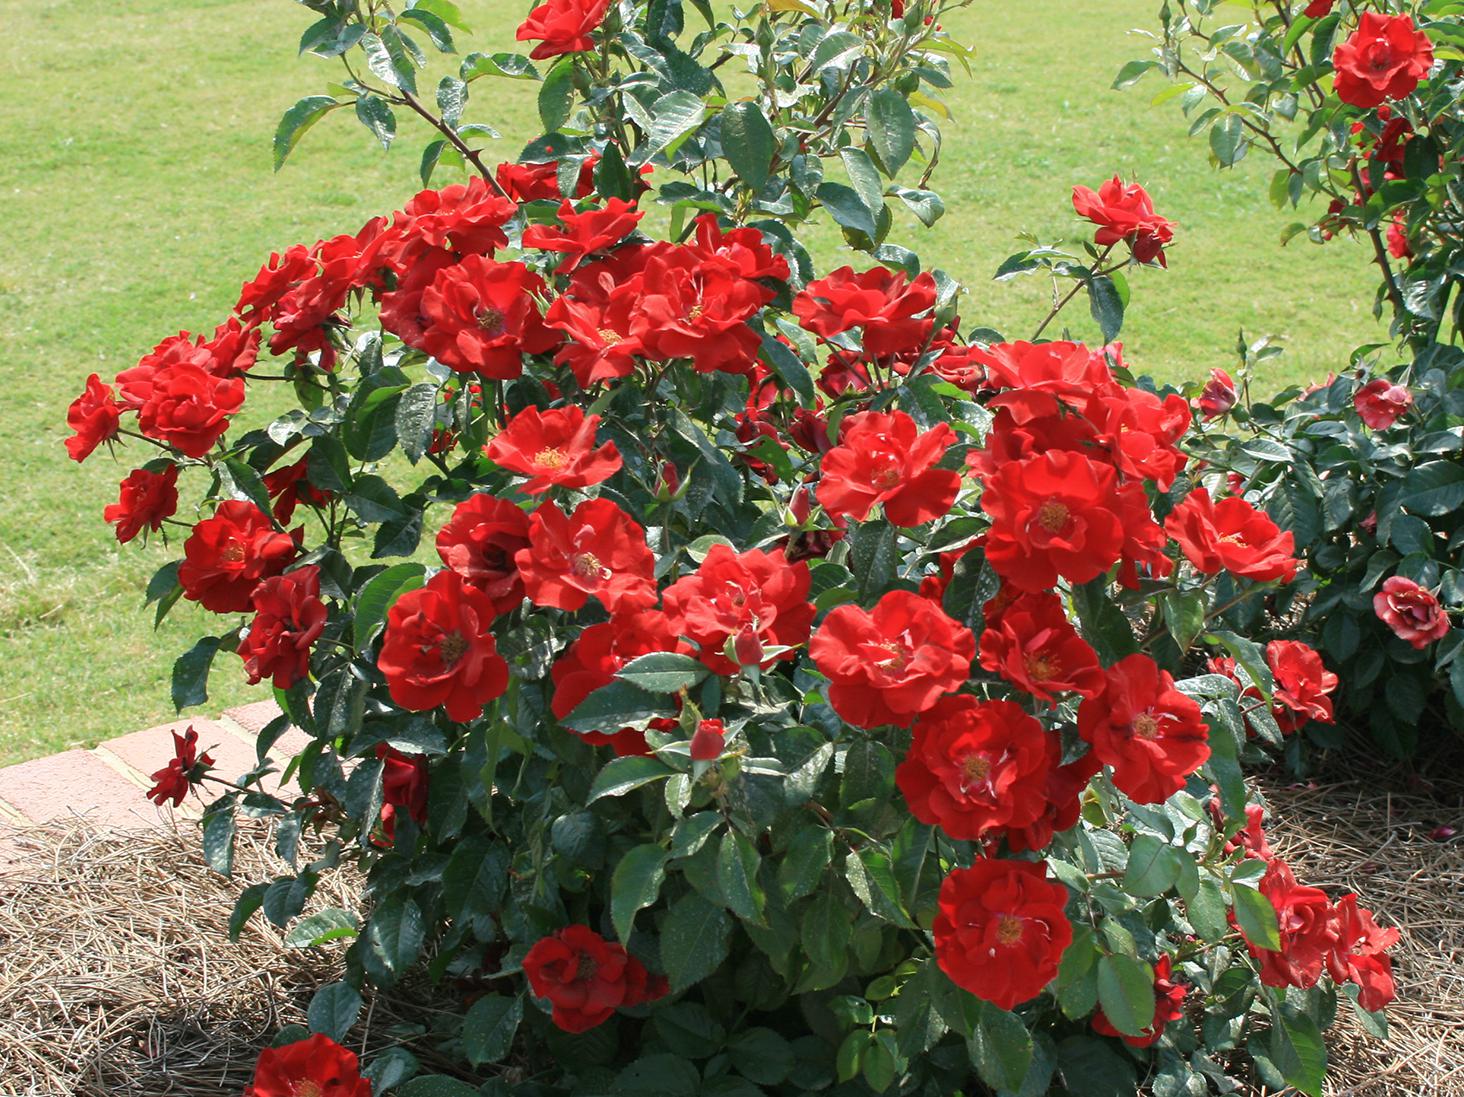 Roses are a beautiful addition to home landscapes, and certain modern varieties offer reliable performance without requiring expert care. (Photo by MSU Extension/Gary Bachman)